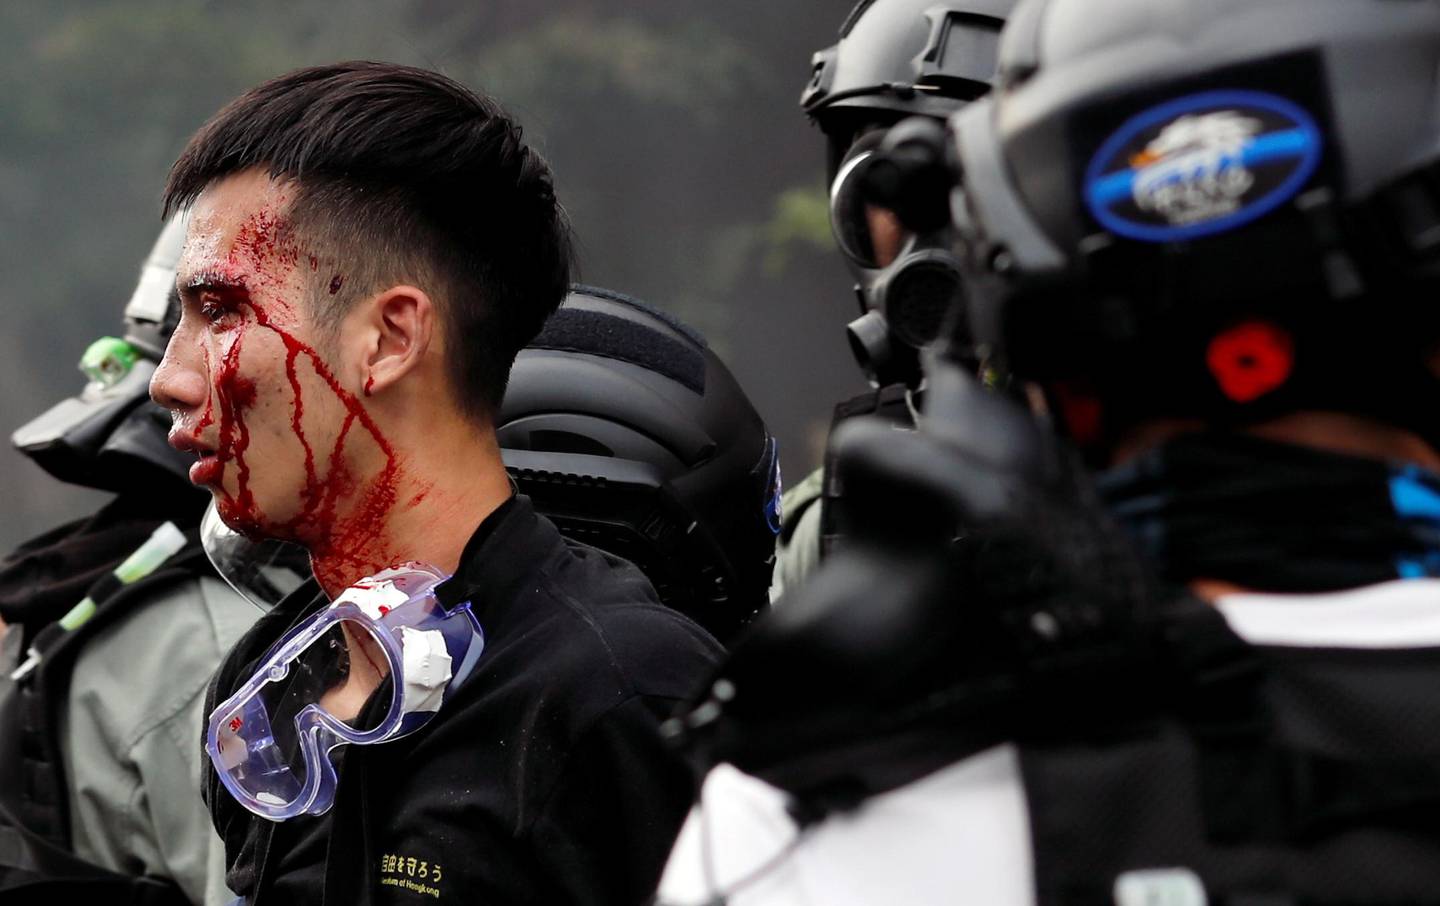 SENSITIVE MATERIAL. THIS IMAGE MAY OFFEND OR DISTURB    Police detain protesters who attempt to leave the campus of Hong Kong Polytechnic University (PolyU) during clashes with police in Hong Kong, China November 18, 2019. REUTERS/Tyrone Siu     TPX IMAGES OF THE DAY